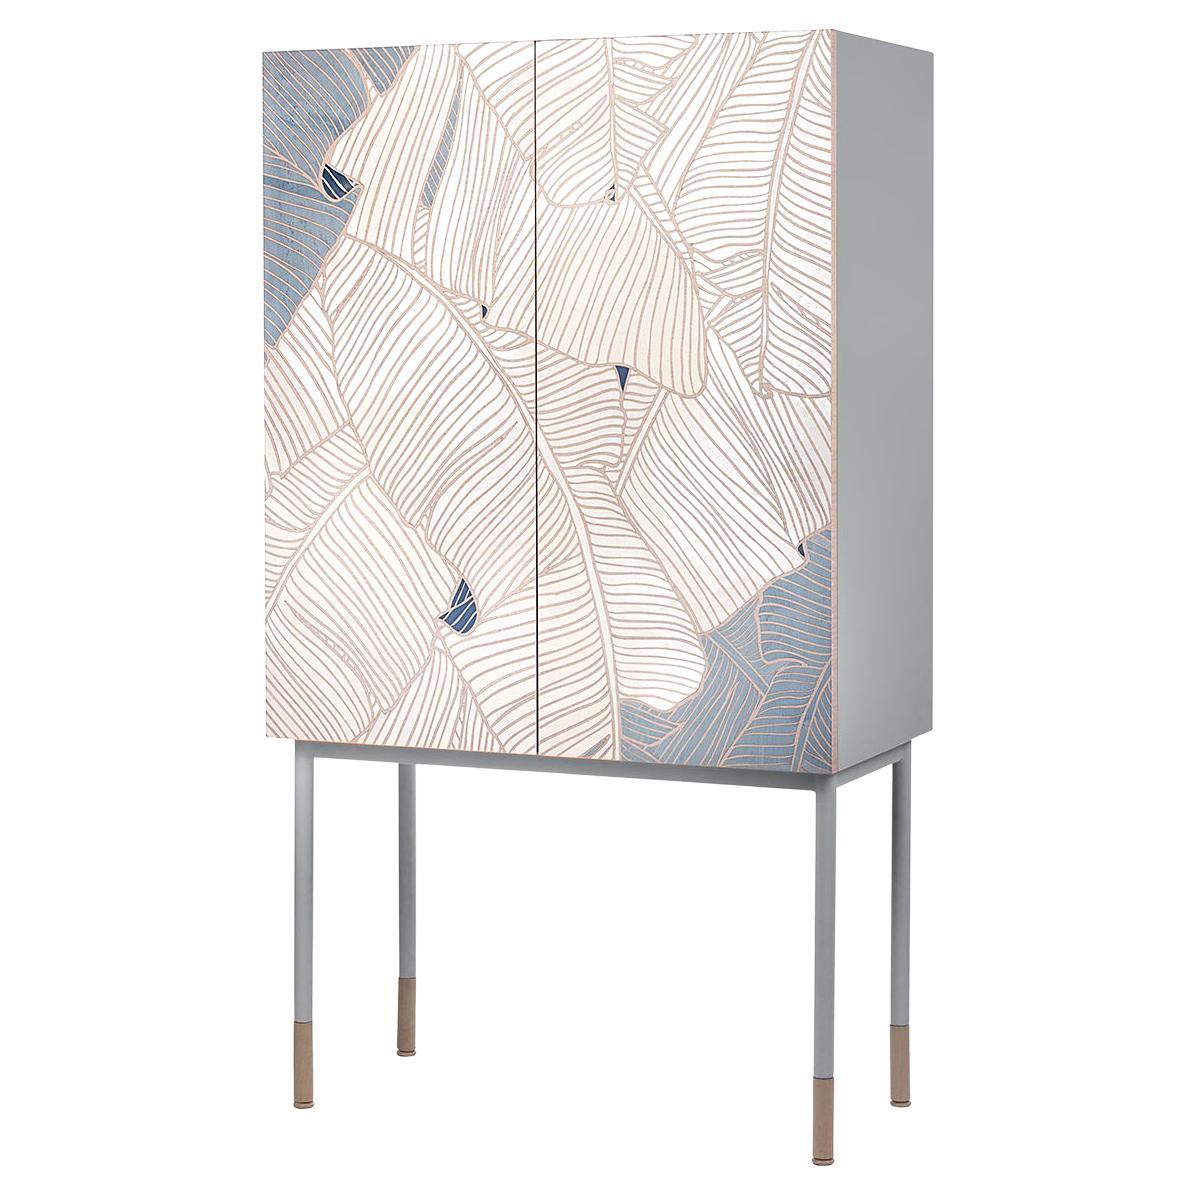 21st Century Basjoo Bar Cabinet in Cedar, White and Blue Erable, Made in Italy